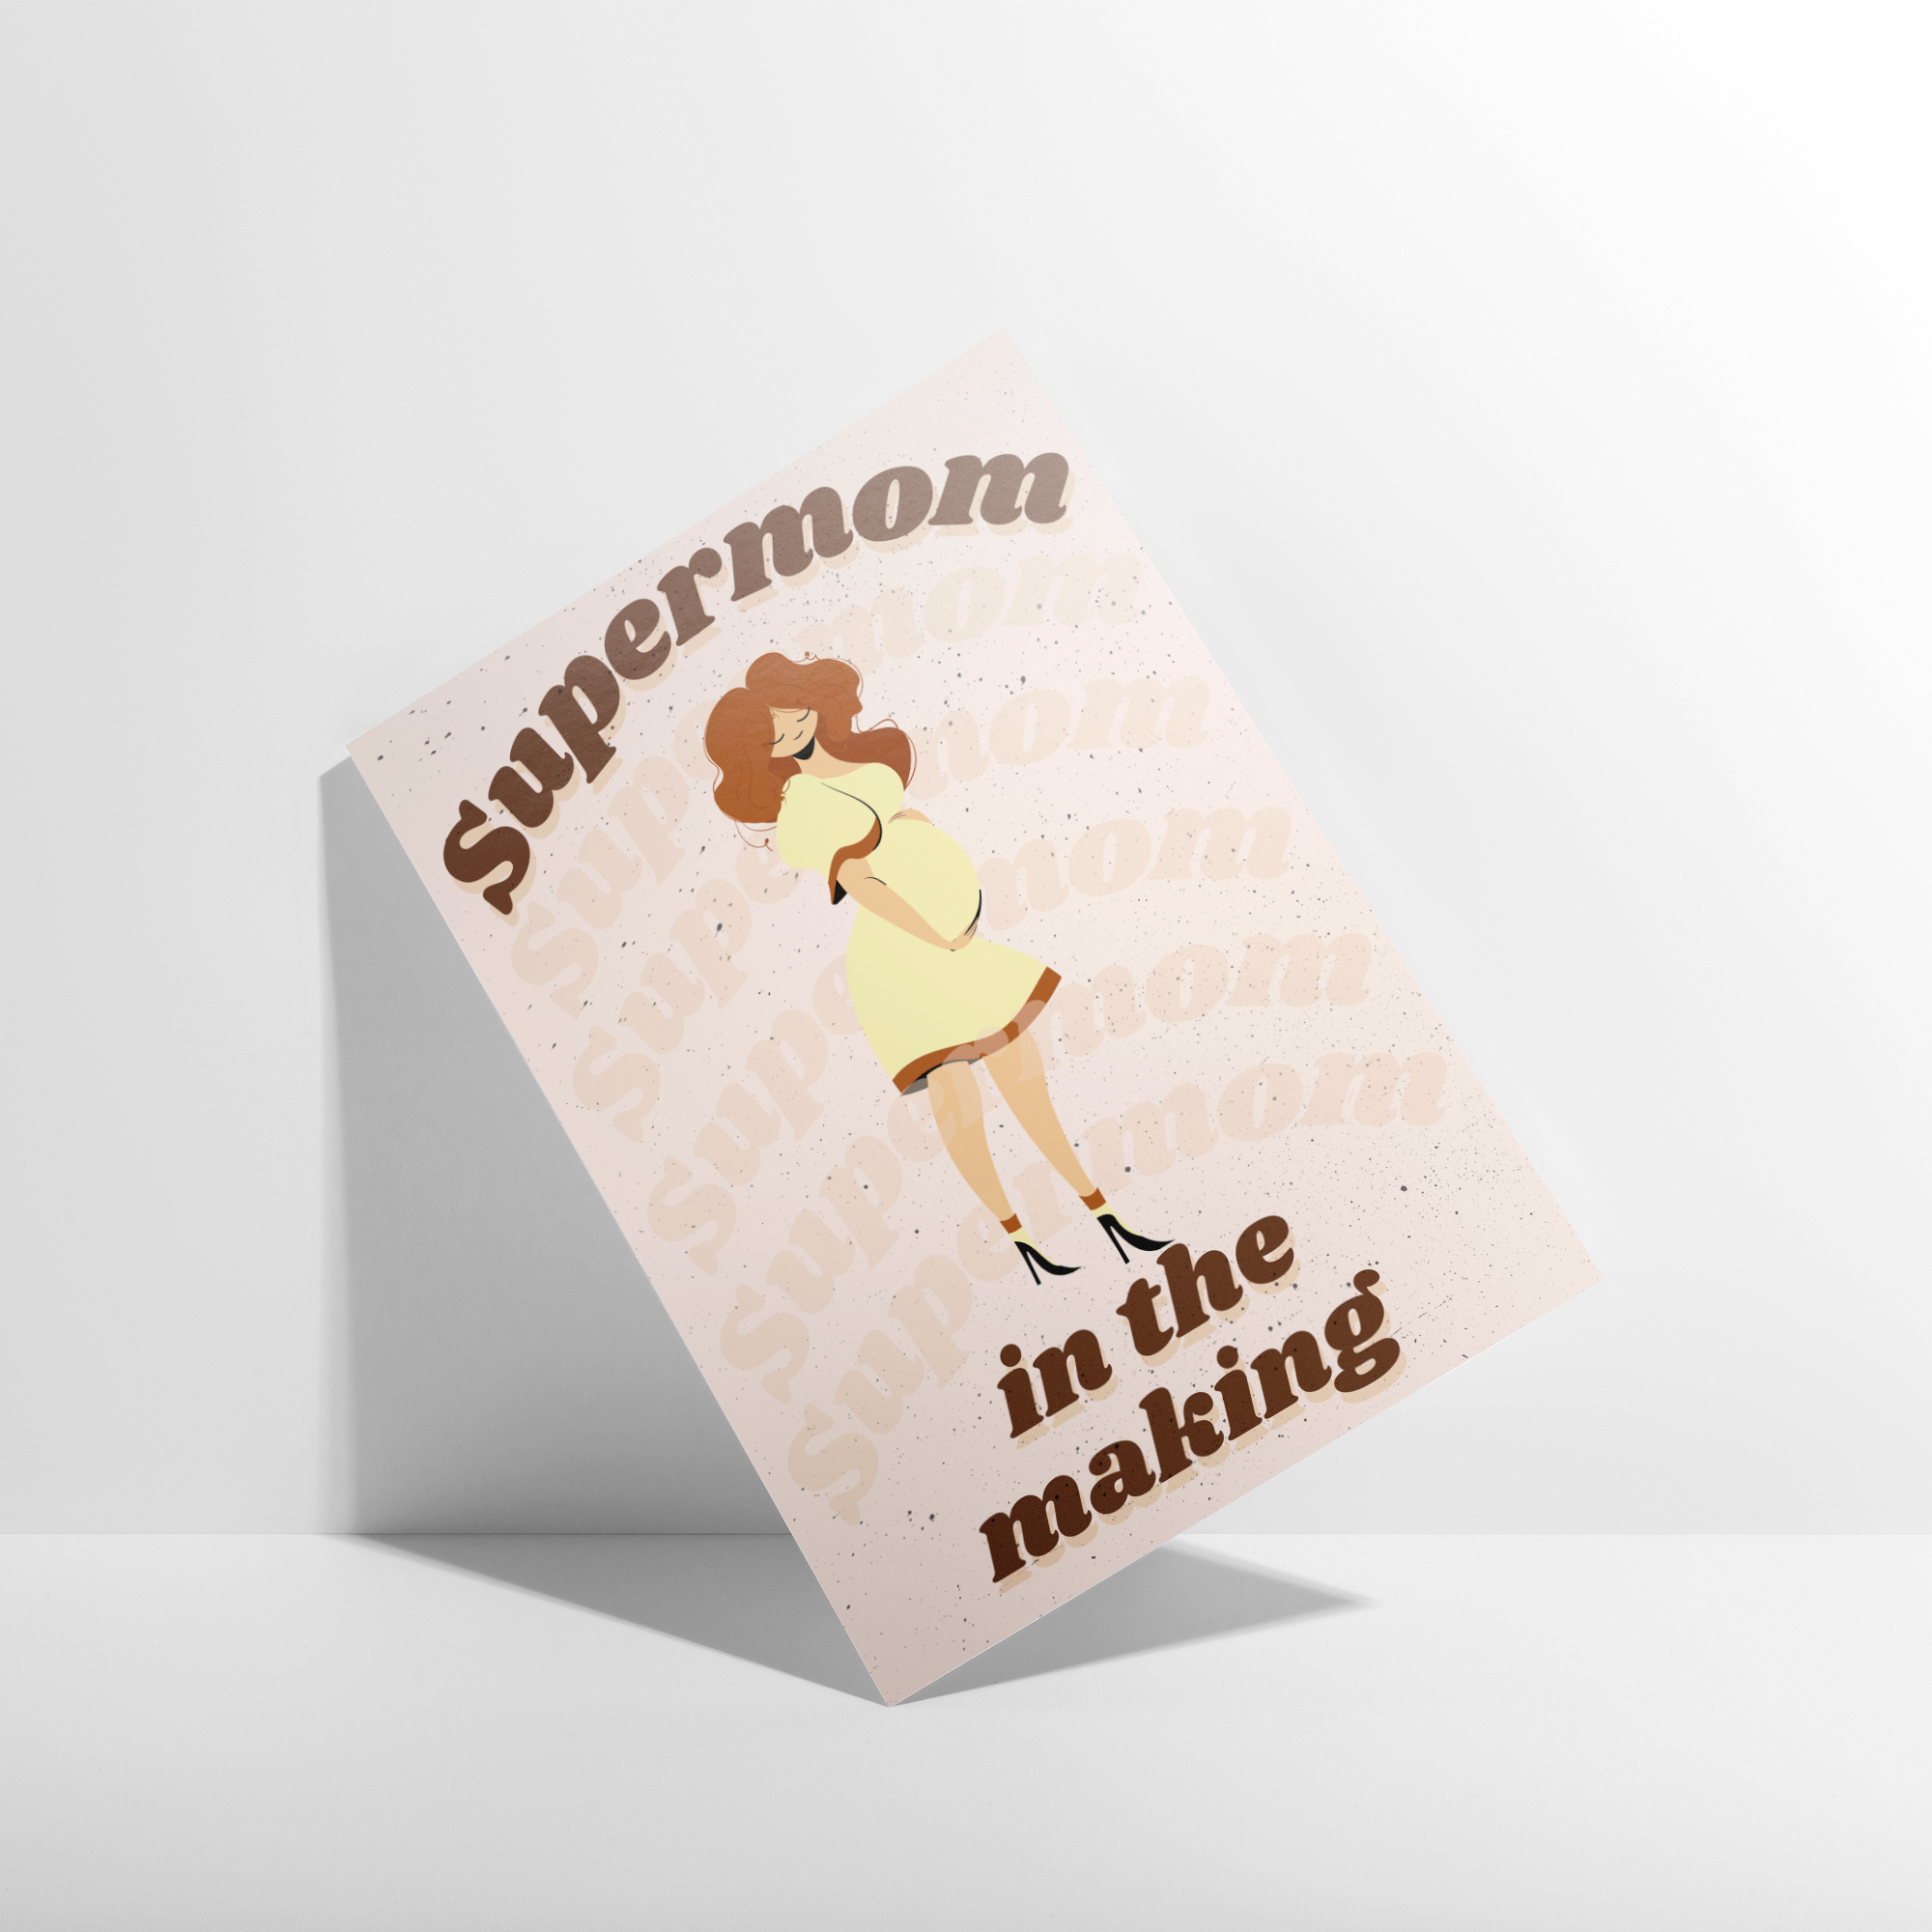 Supermom in the making  V2 Greeting card